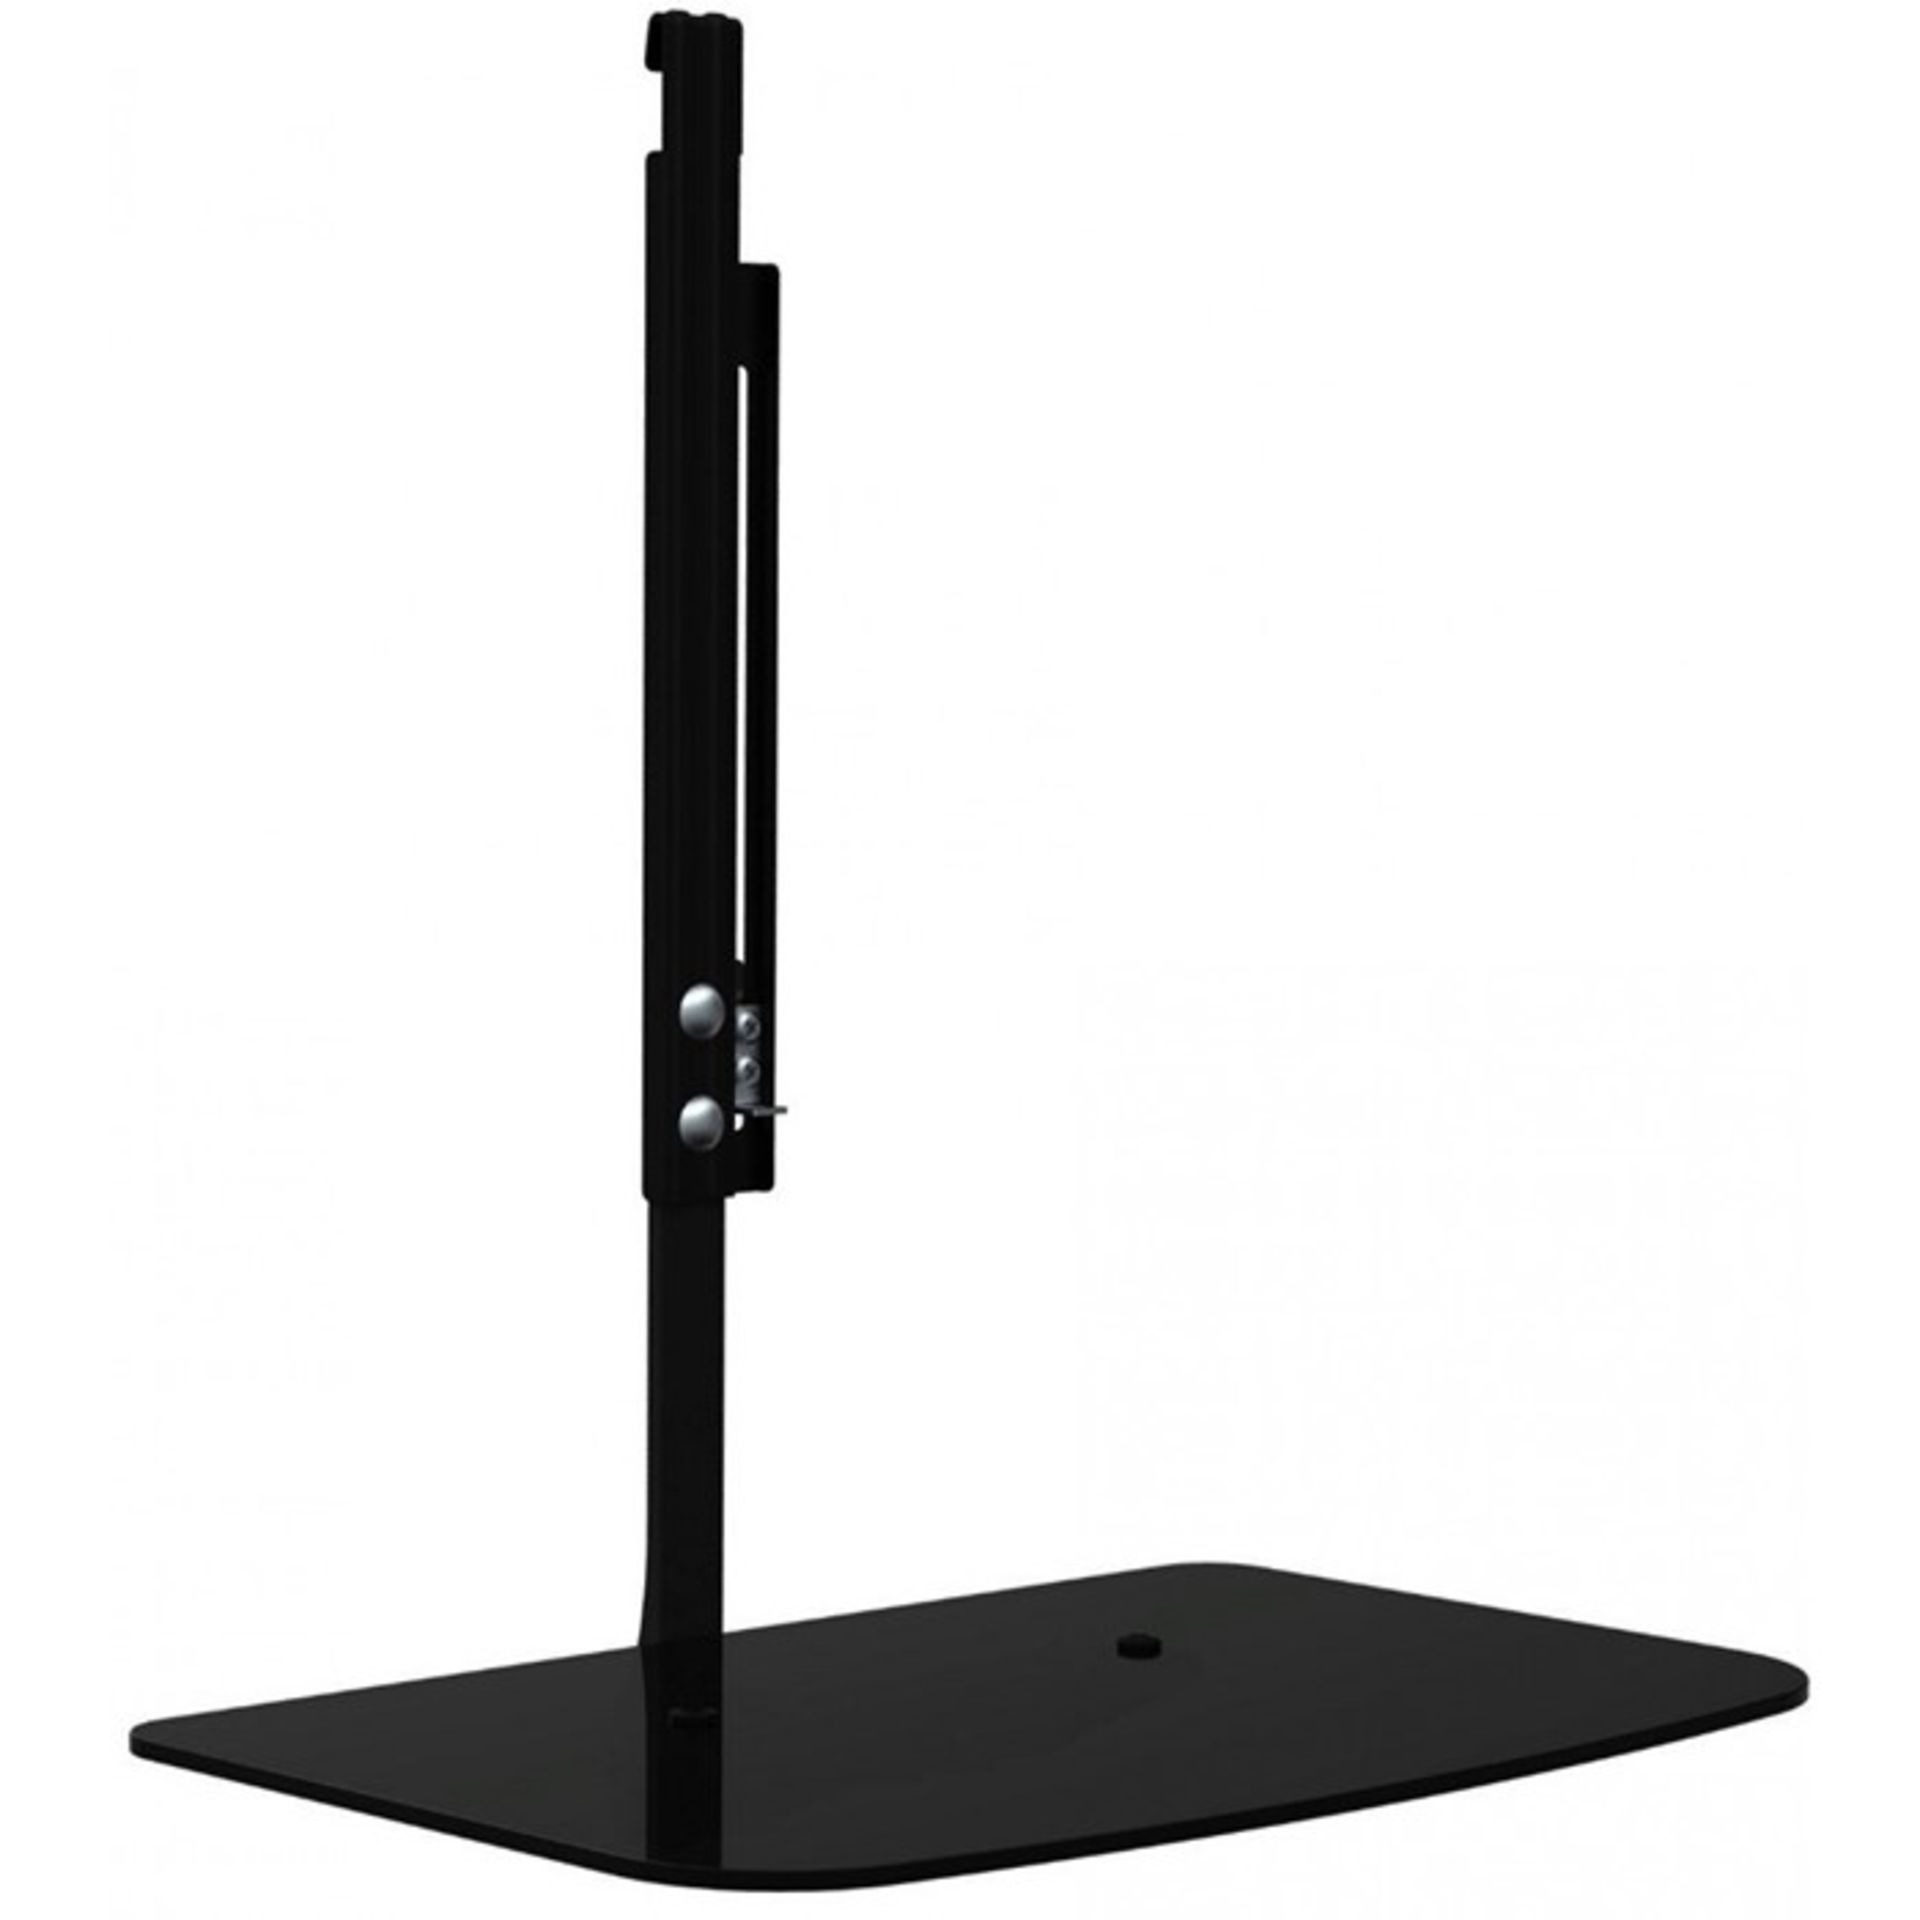 5 AS NEW BOXED TV/DVD HANGING SHELVES IN BLACK / TVS323BLK